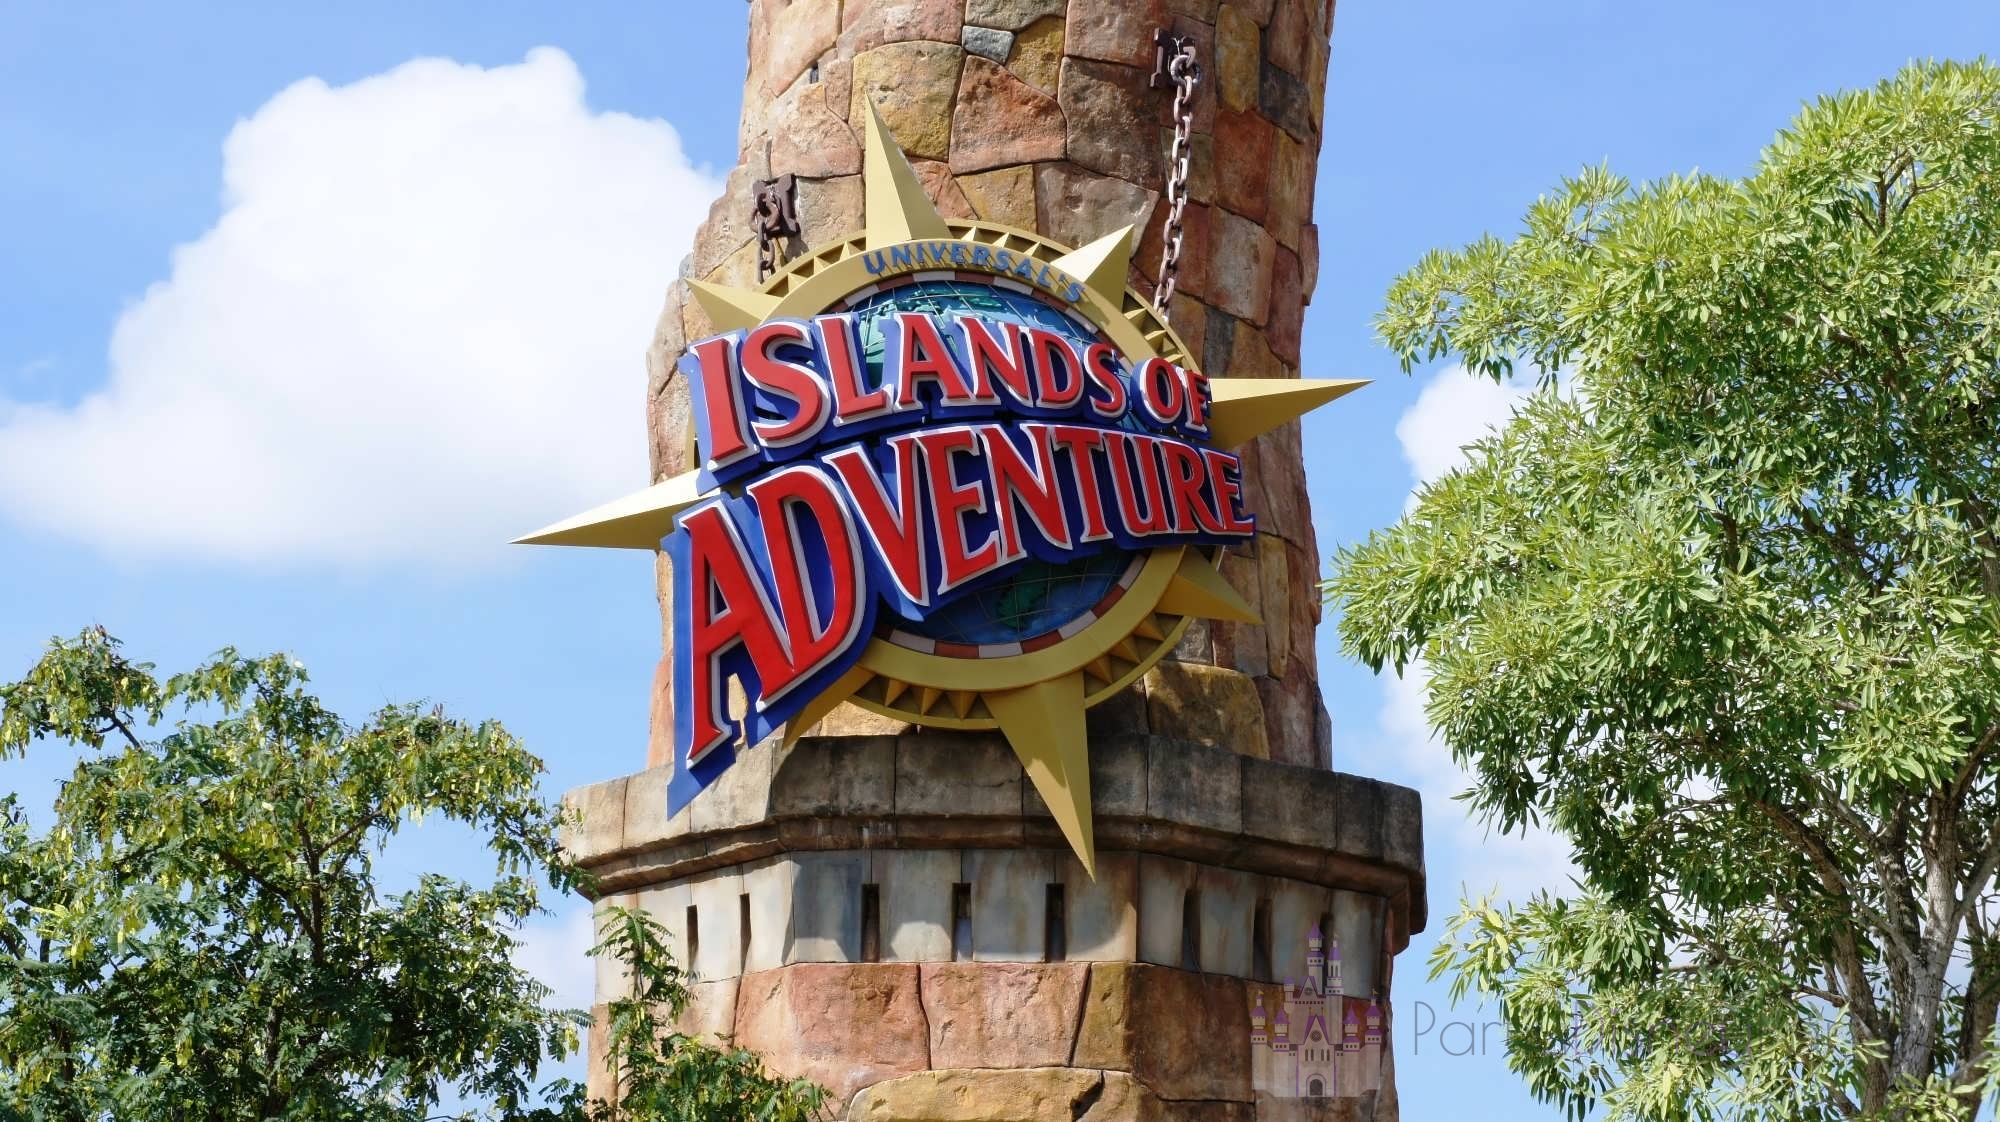 Check out our Islands of Adventure 1-day itinerary